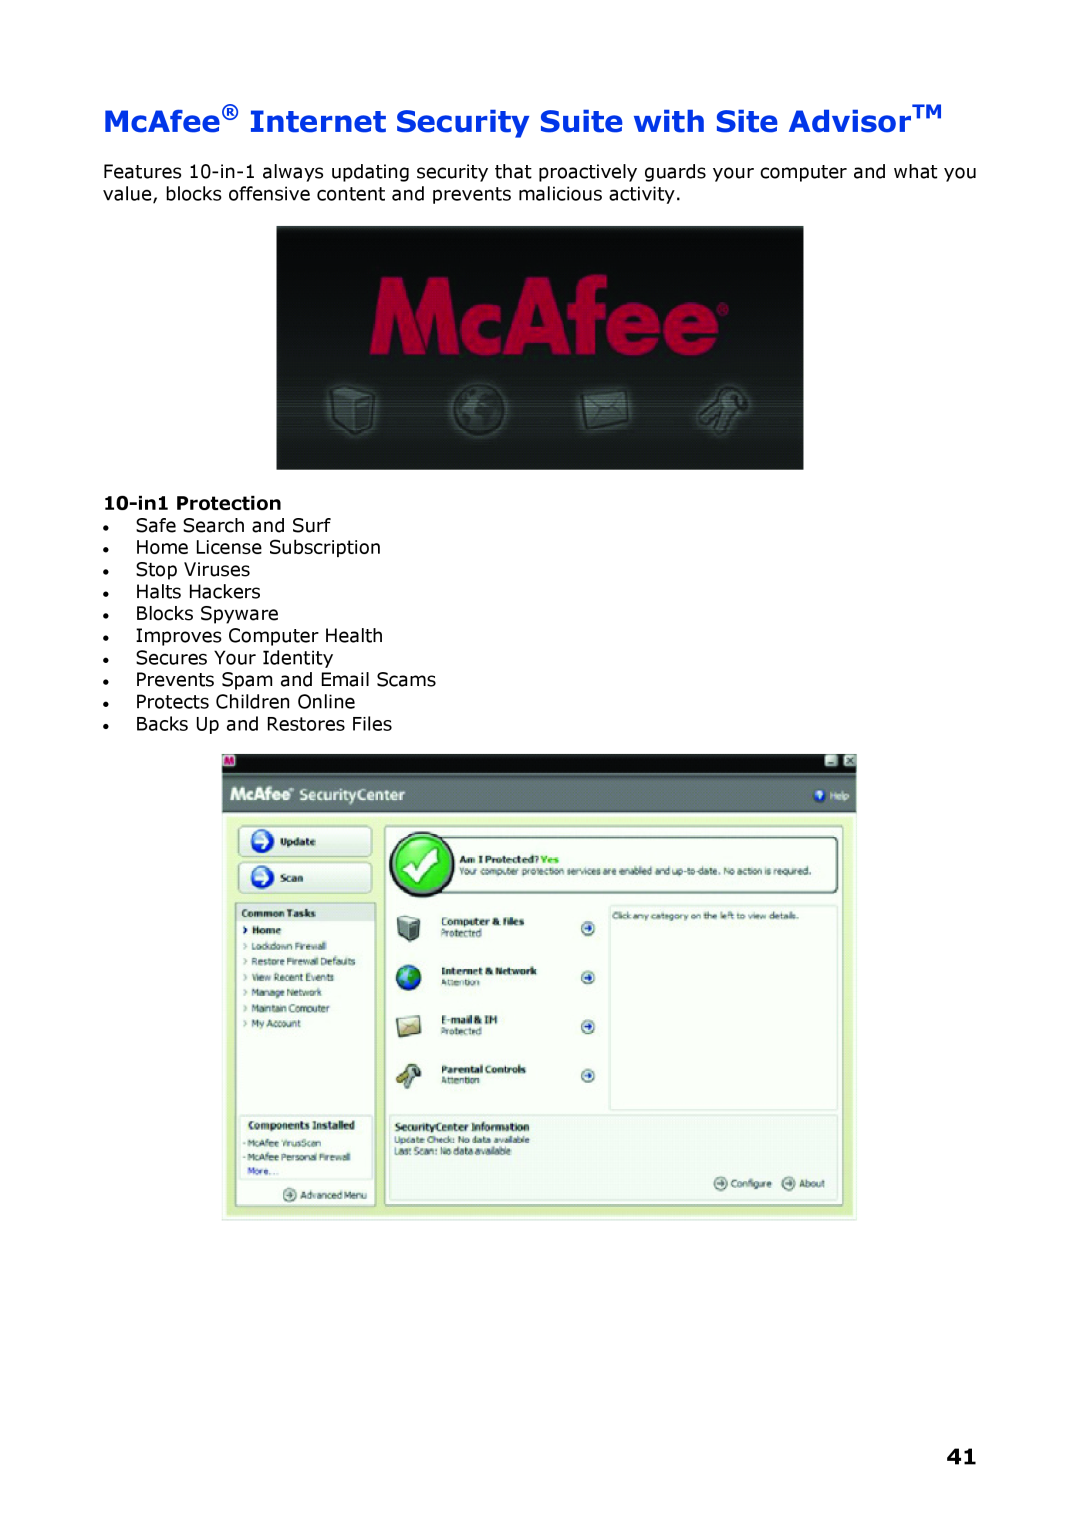 NEC P8510 manual McAfee Internet Security Suite with Site AdvisorTM, 10-in1 Protection 